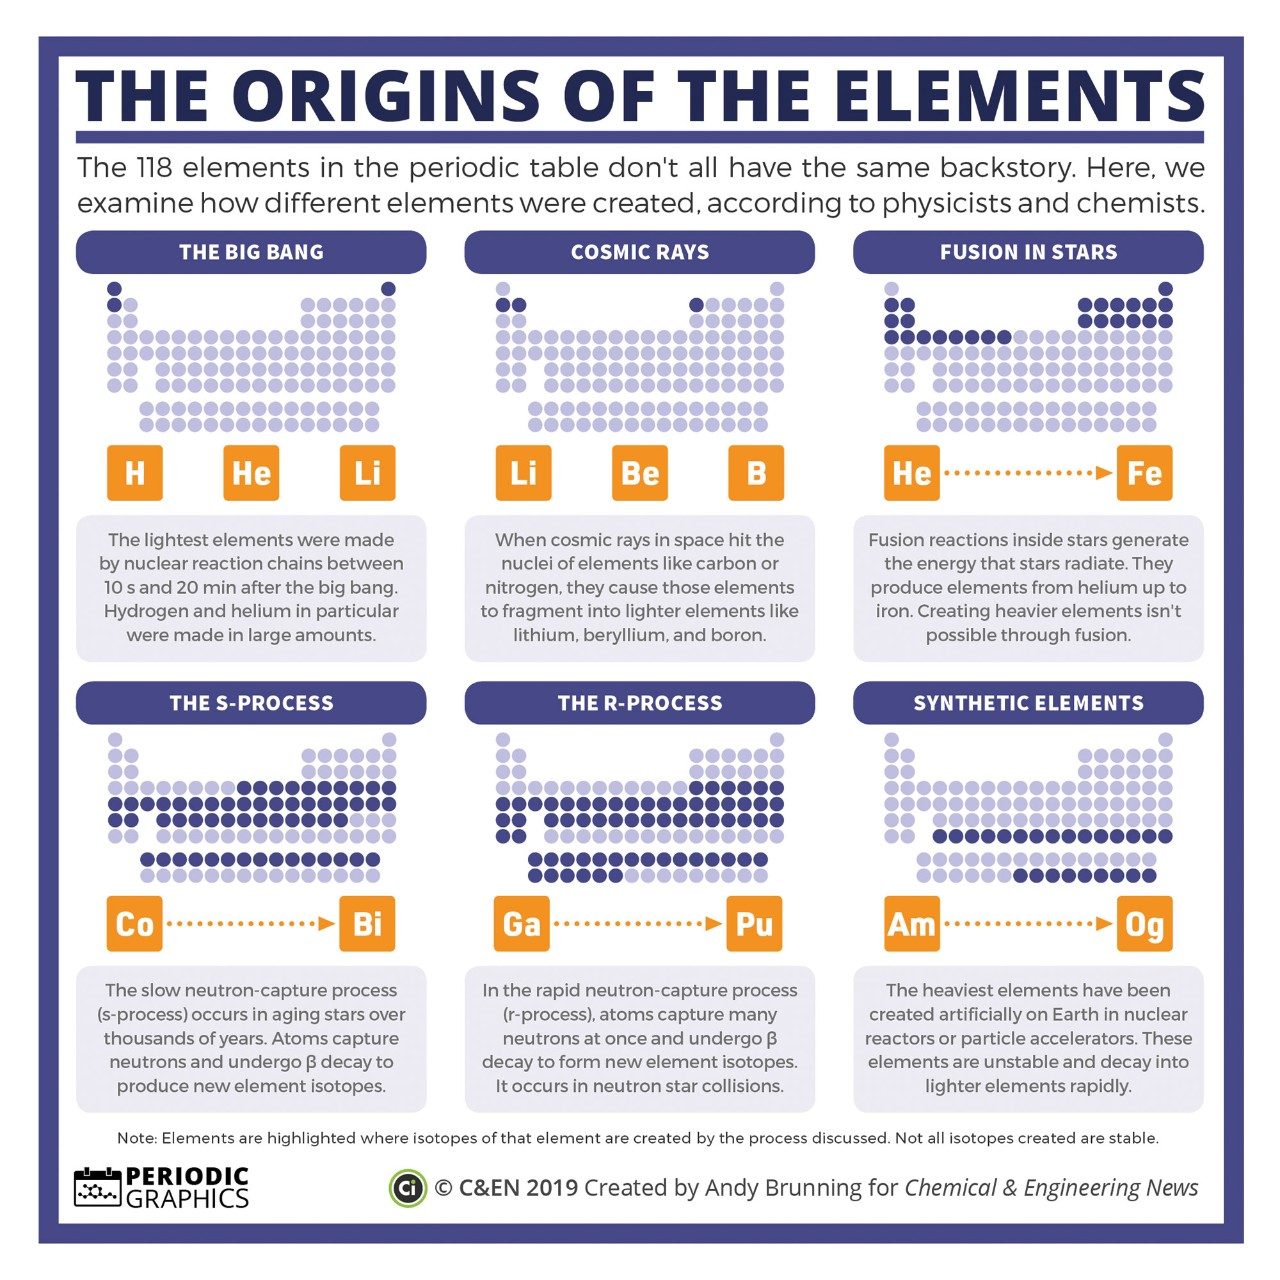 Origins of the Elements infographic